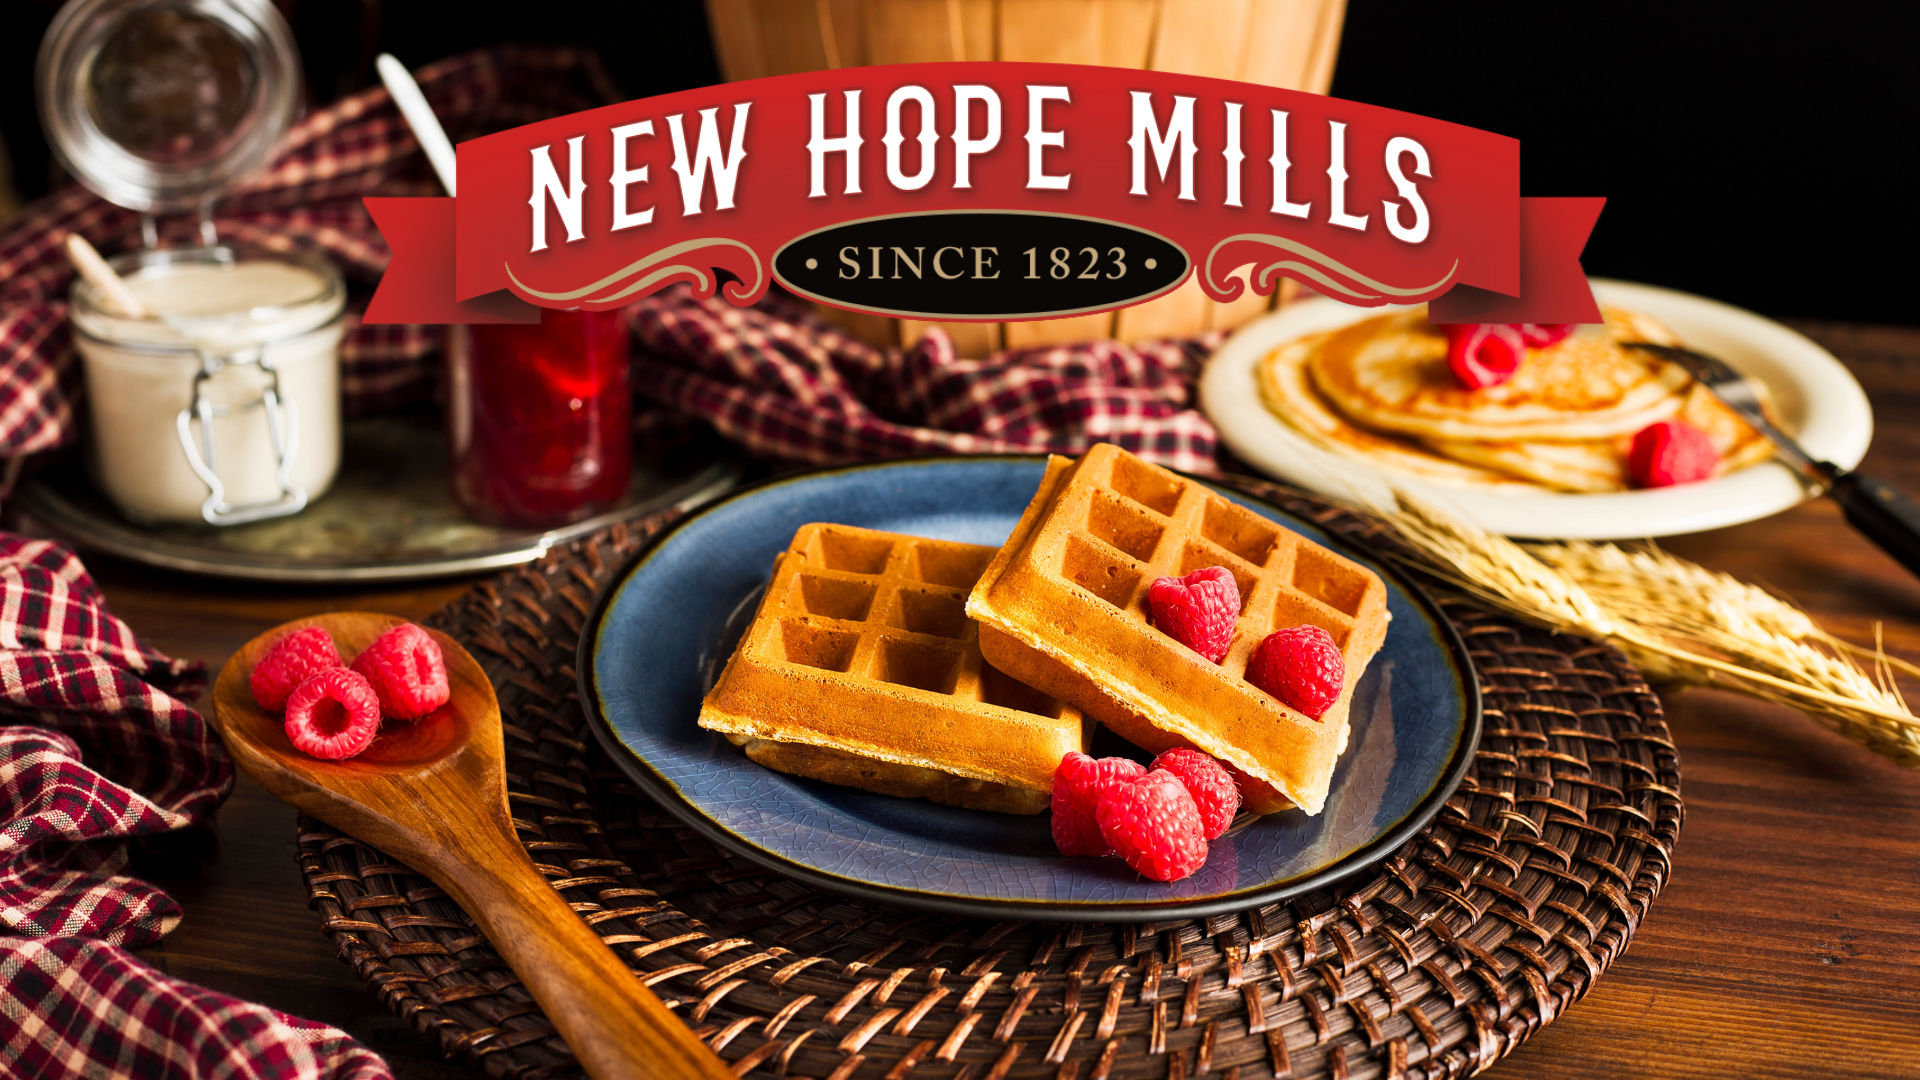 New Hope Mills Cafe' and Store graphic; "New Hope Mills. Since 1823" text with waffles and raspberries in the photo